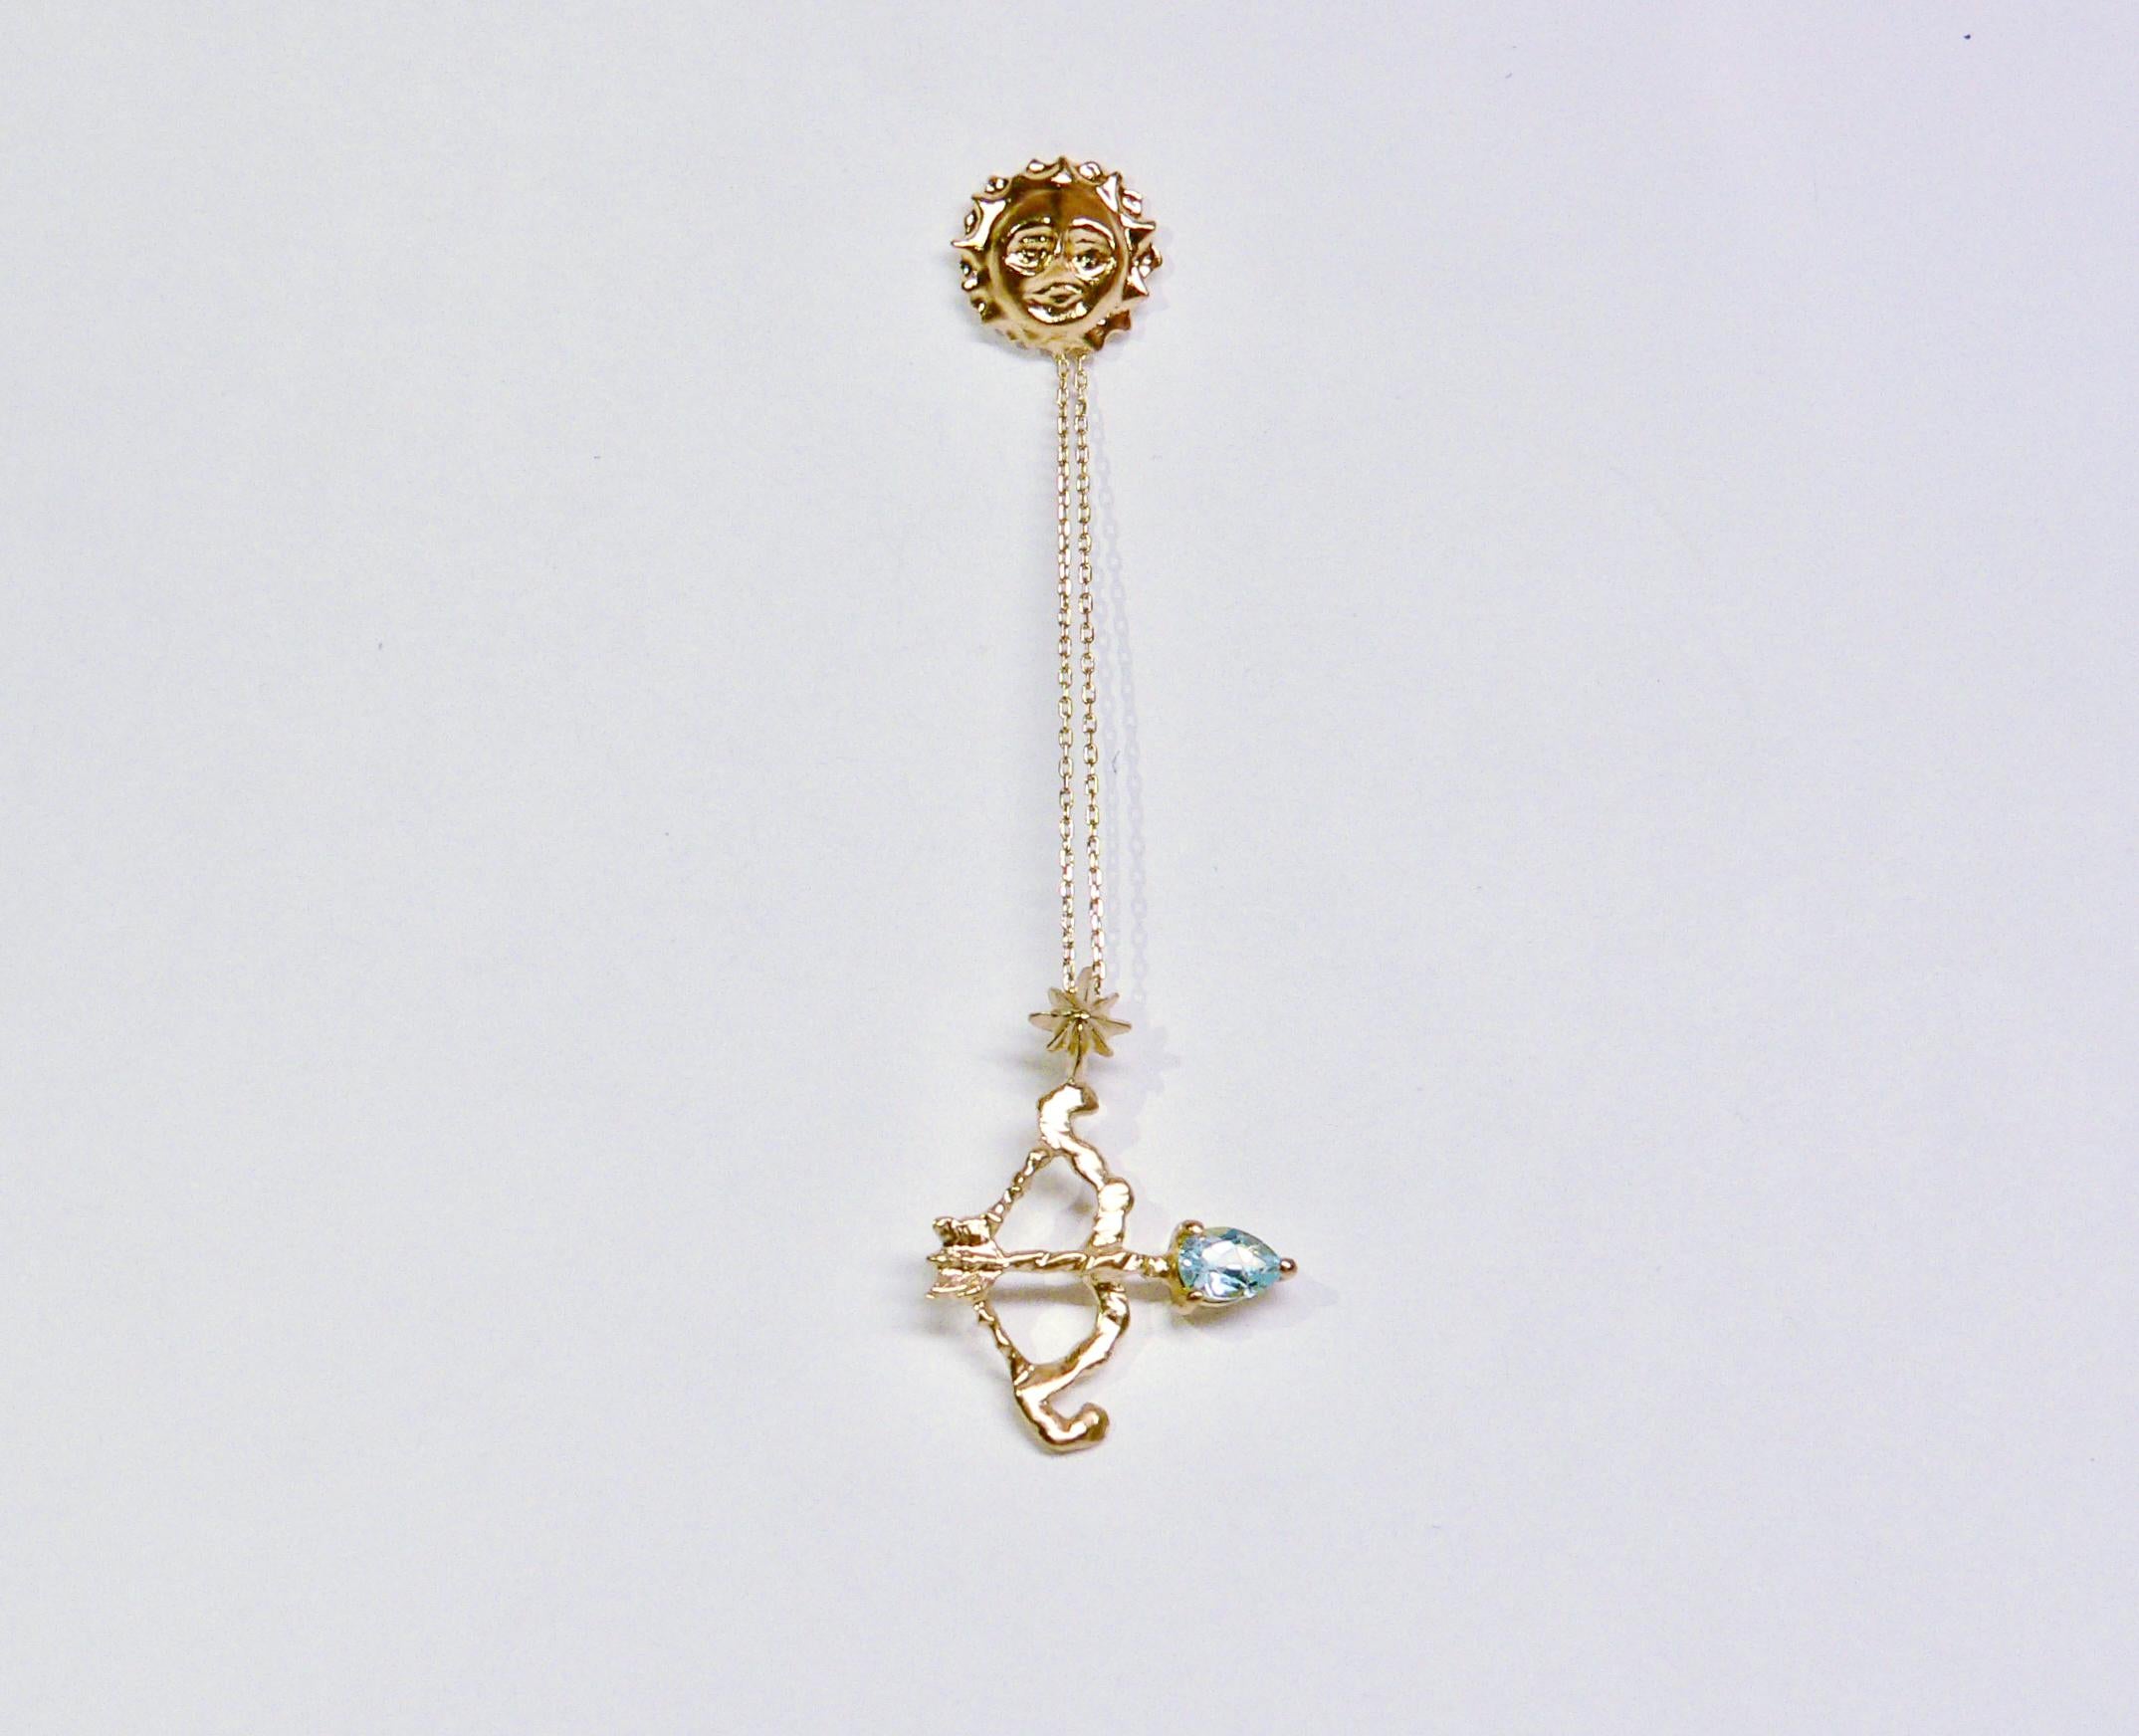 From the night, moon shot the arrow to dawn bright and sunny smiling Sun.

This single earring is made of Sterling Silver with 18 Karat gold plated as one of the Night Collection. Arrow is with blue topaz. 

The size is about 75mm length, 12mm